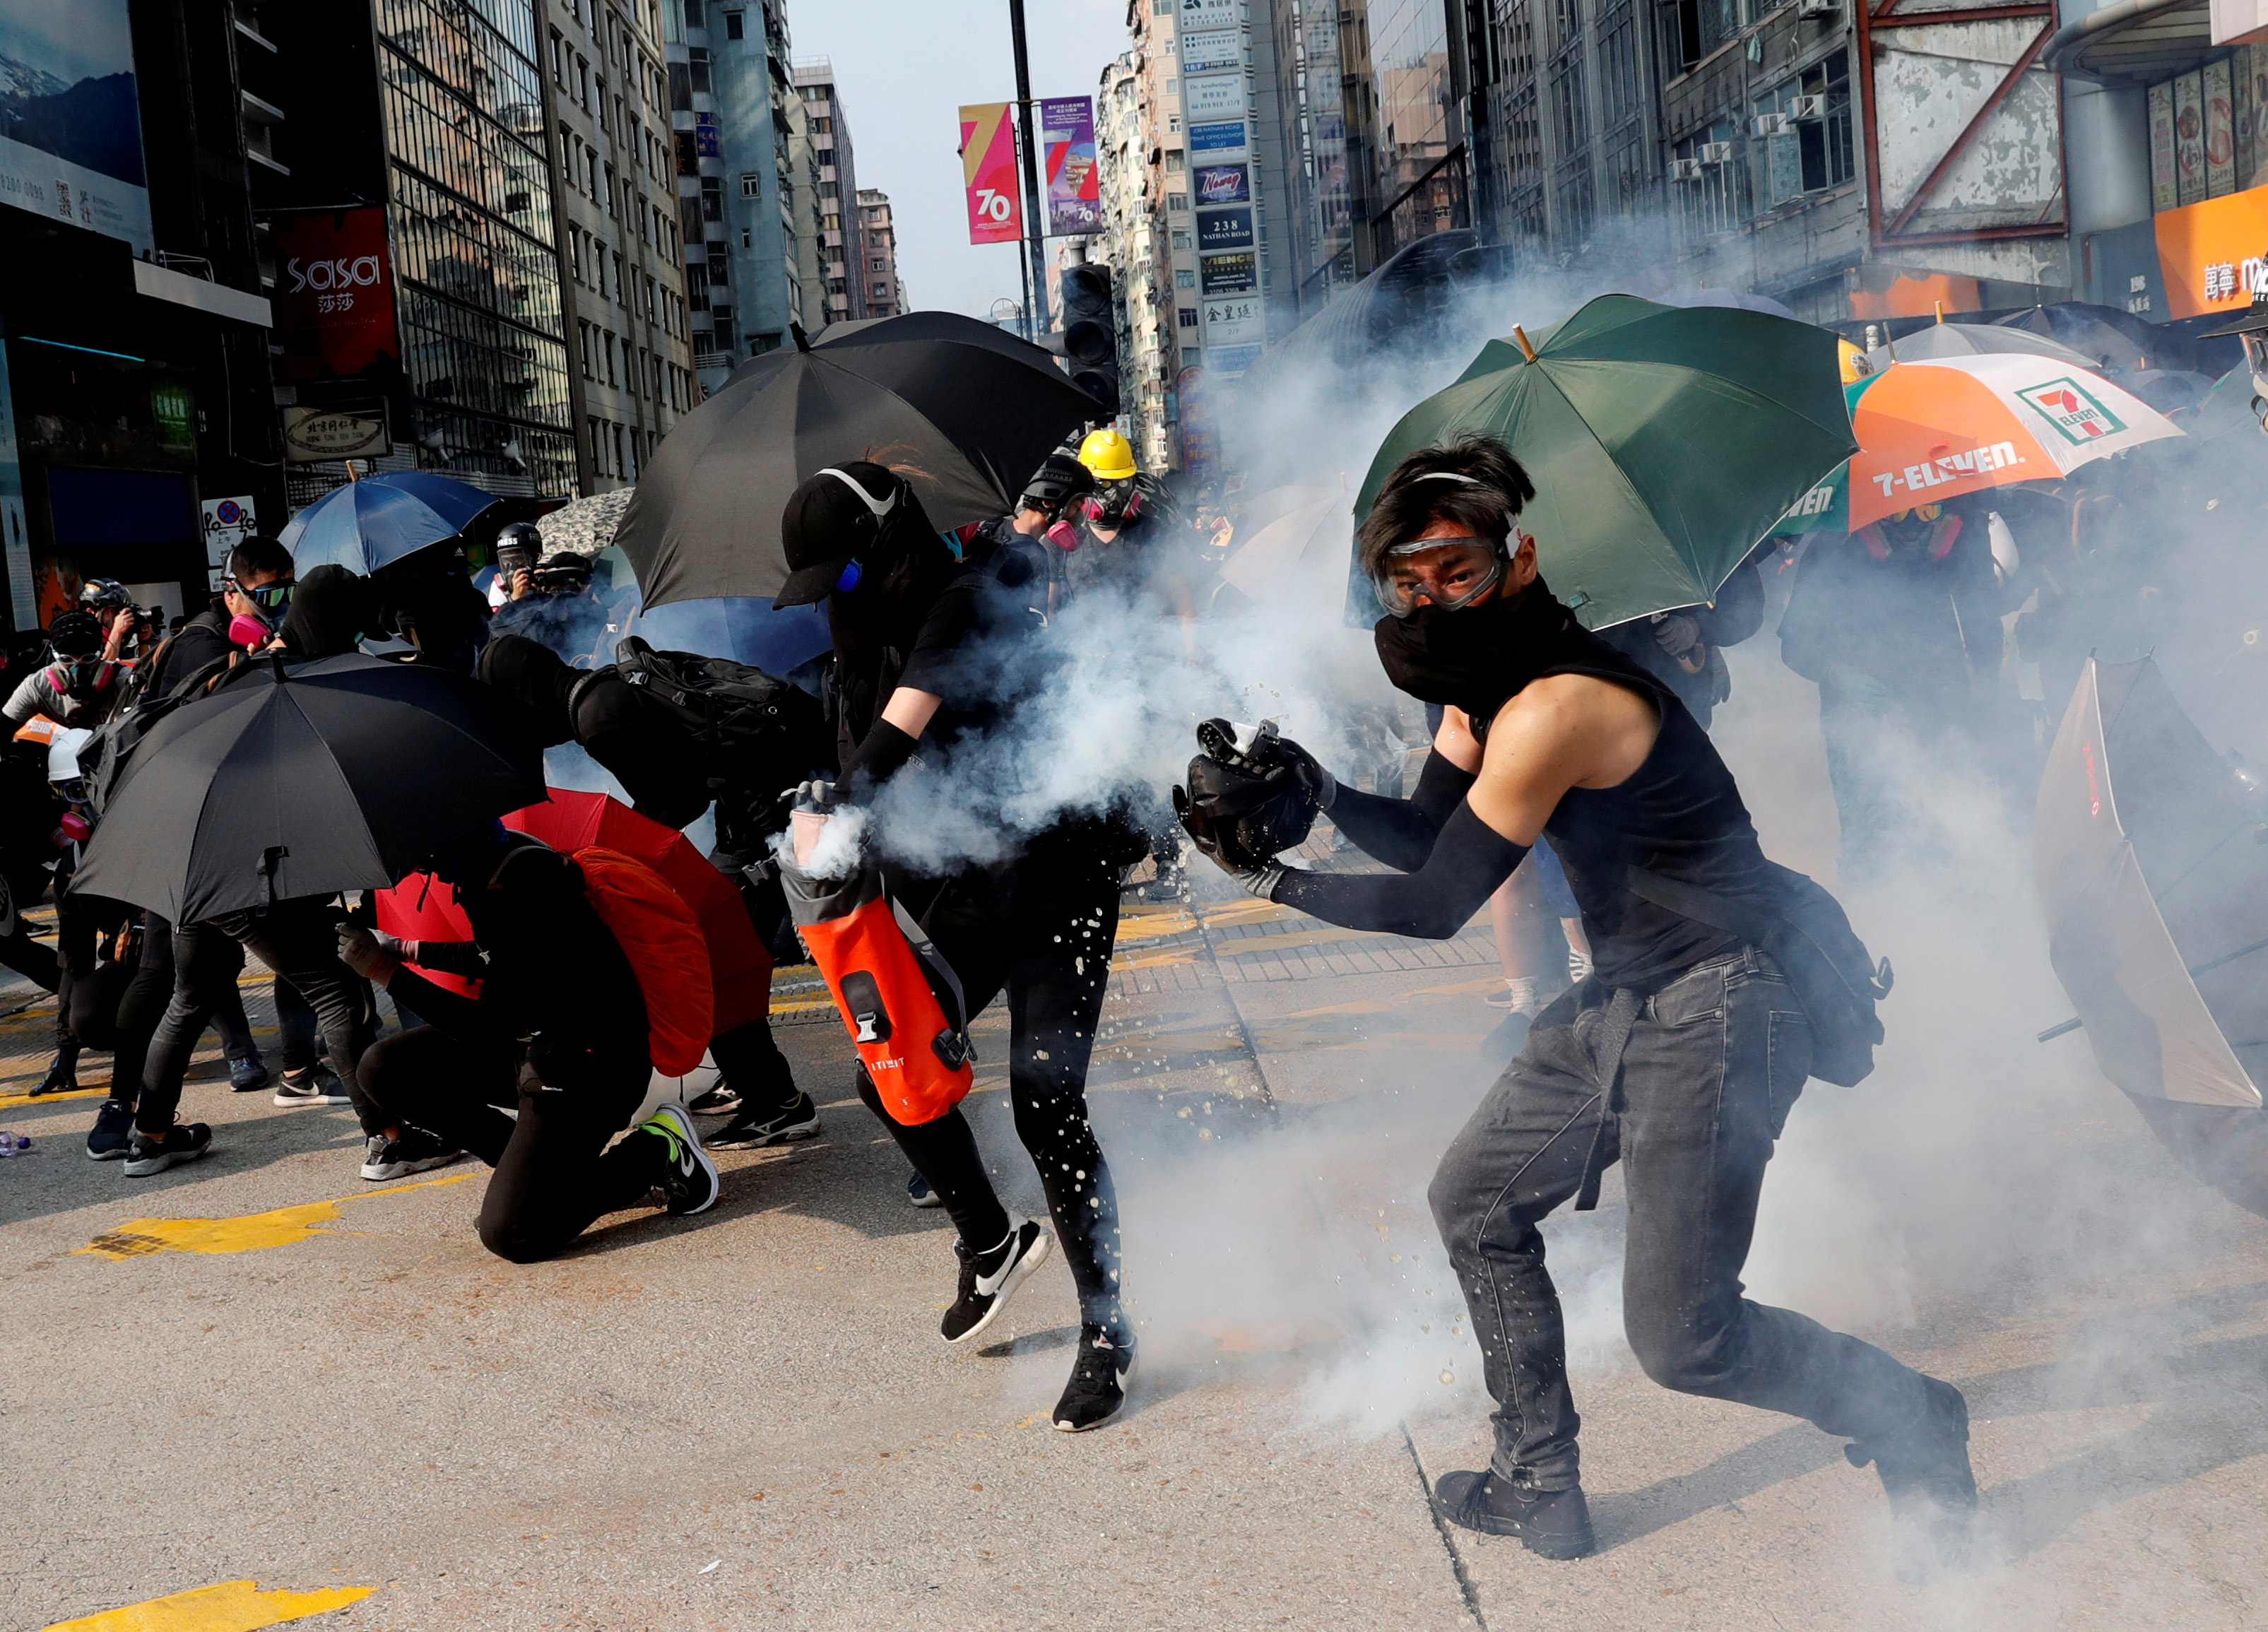 An anti-government demonstrator puts out a tear gas canister with a bag holding water during a protest in front of Tsim Sha Tsui Police Station in Hong Kong, China, October 20, 2019. REUTERS/Kim Kyung-Hoon - RC179FE05390